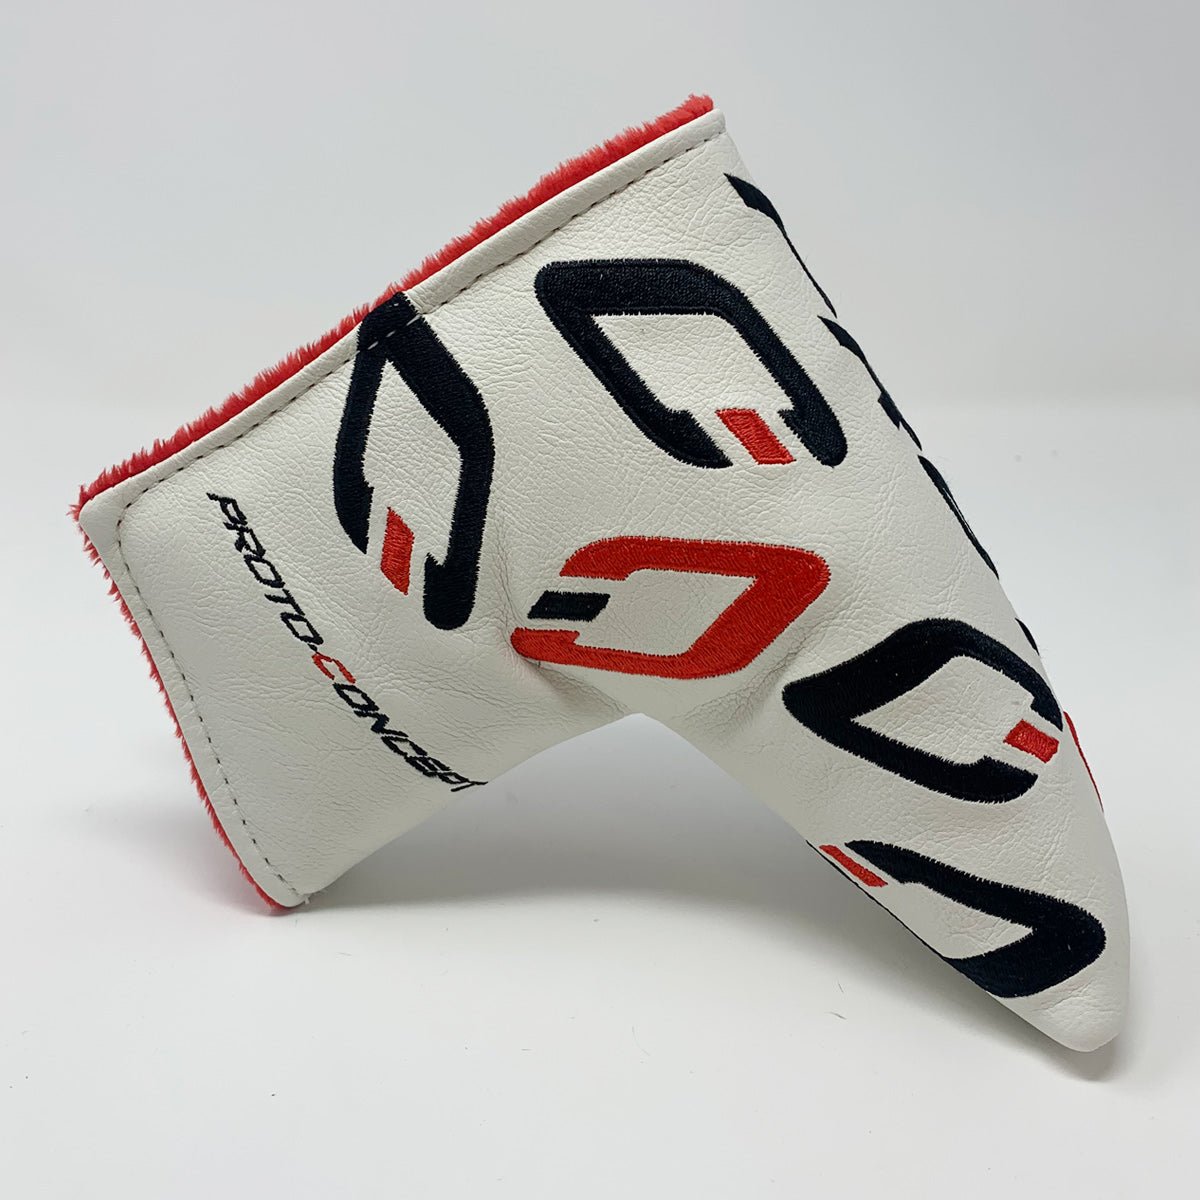 PROTOCONCEPT Golf, Putter cover - 5